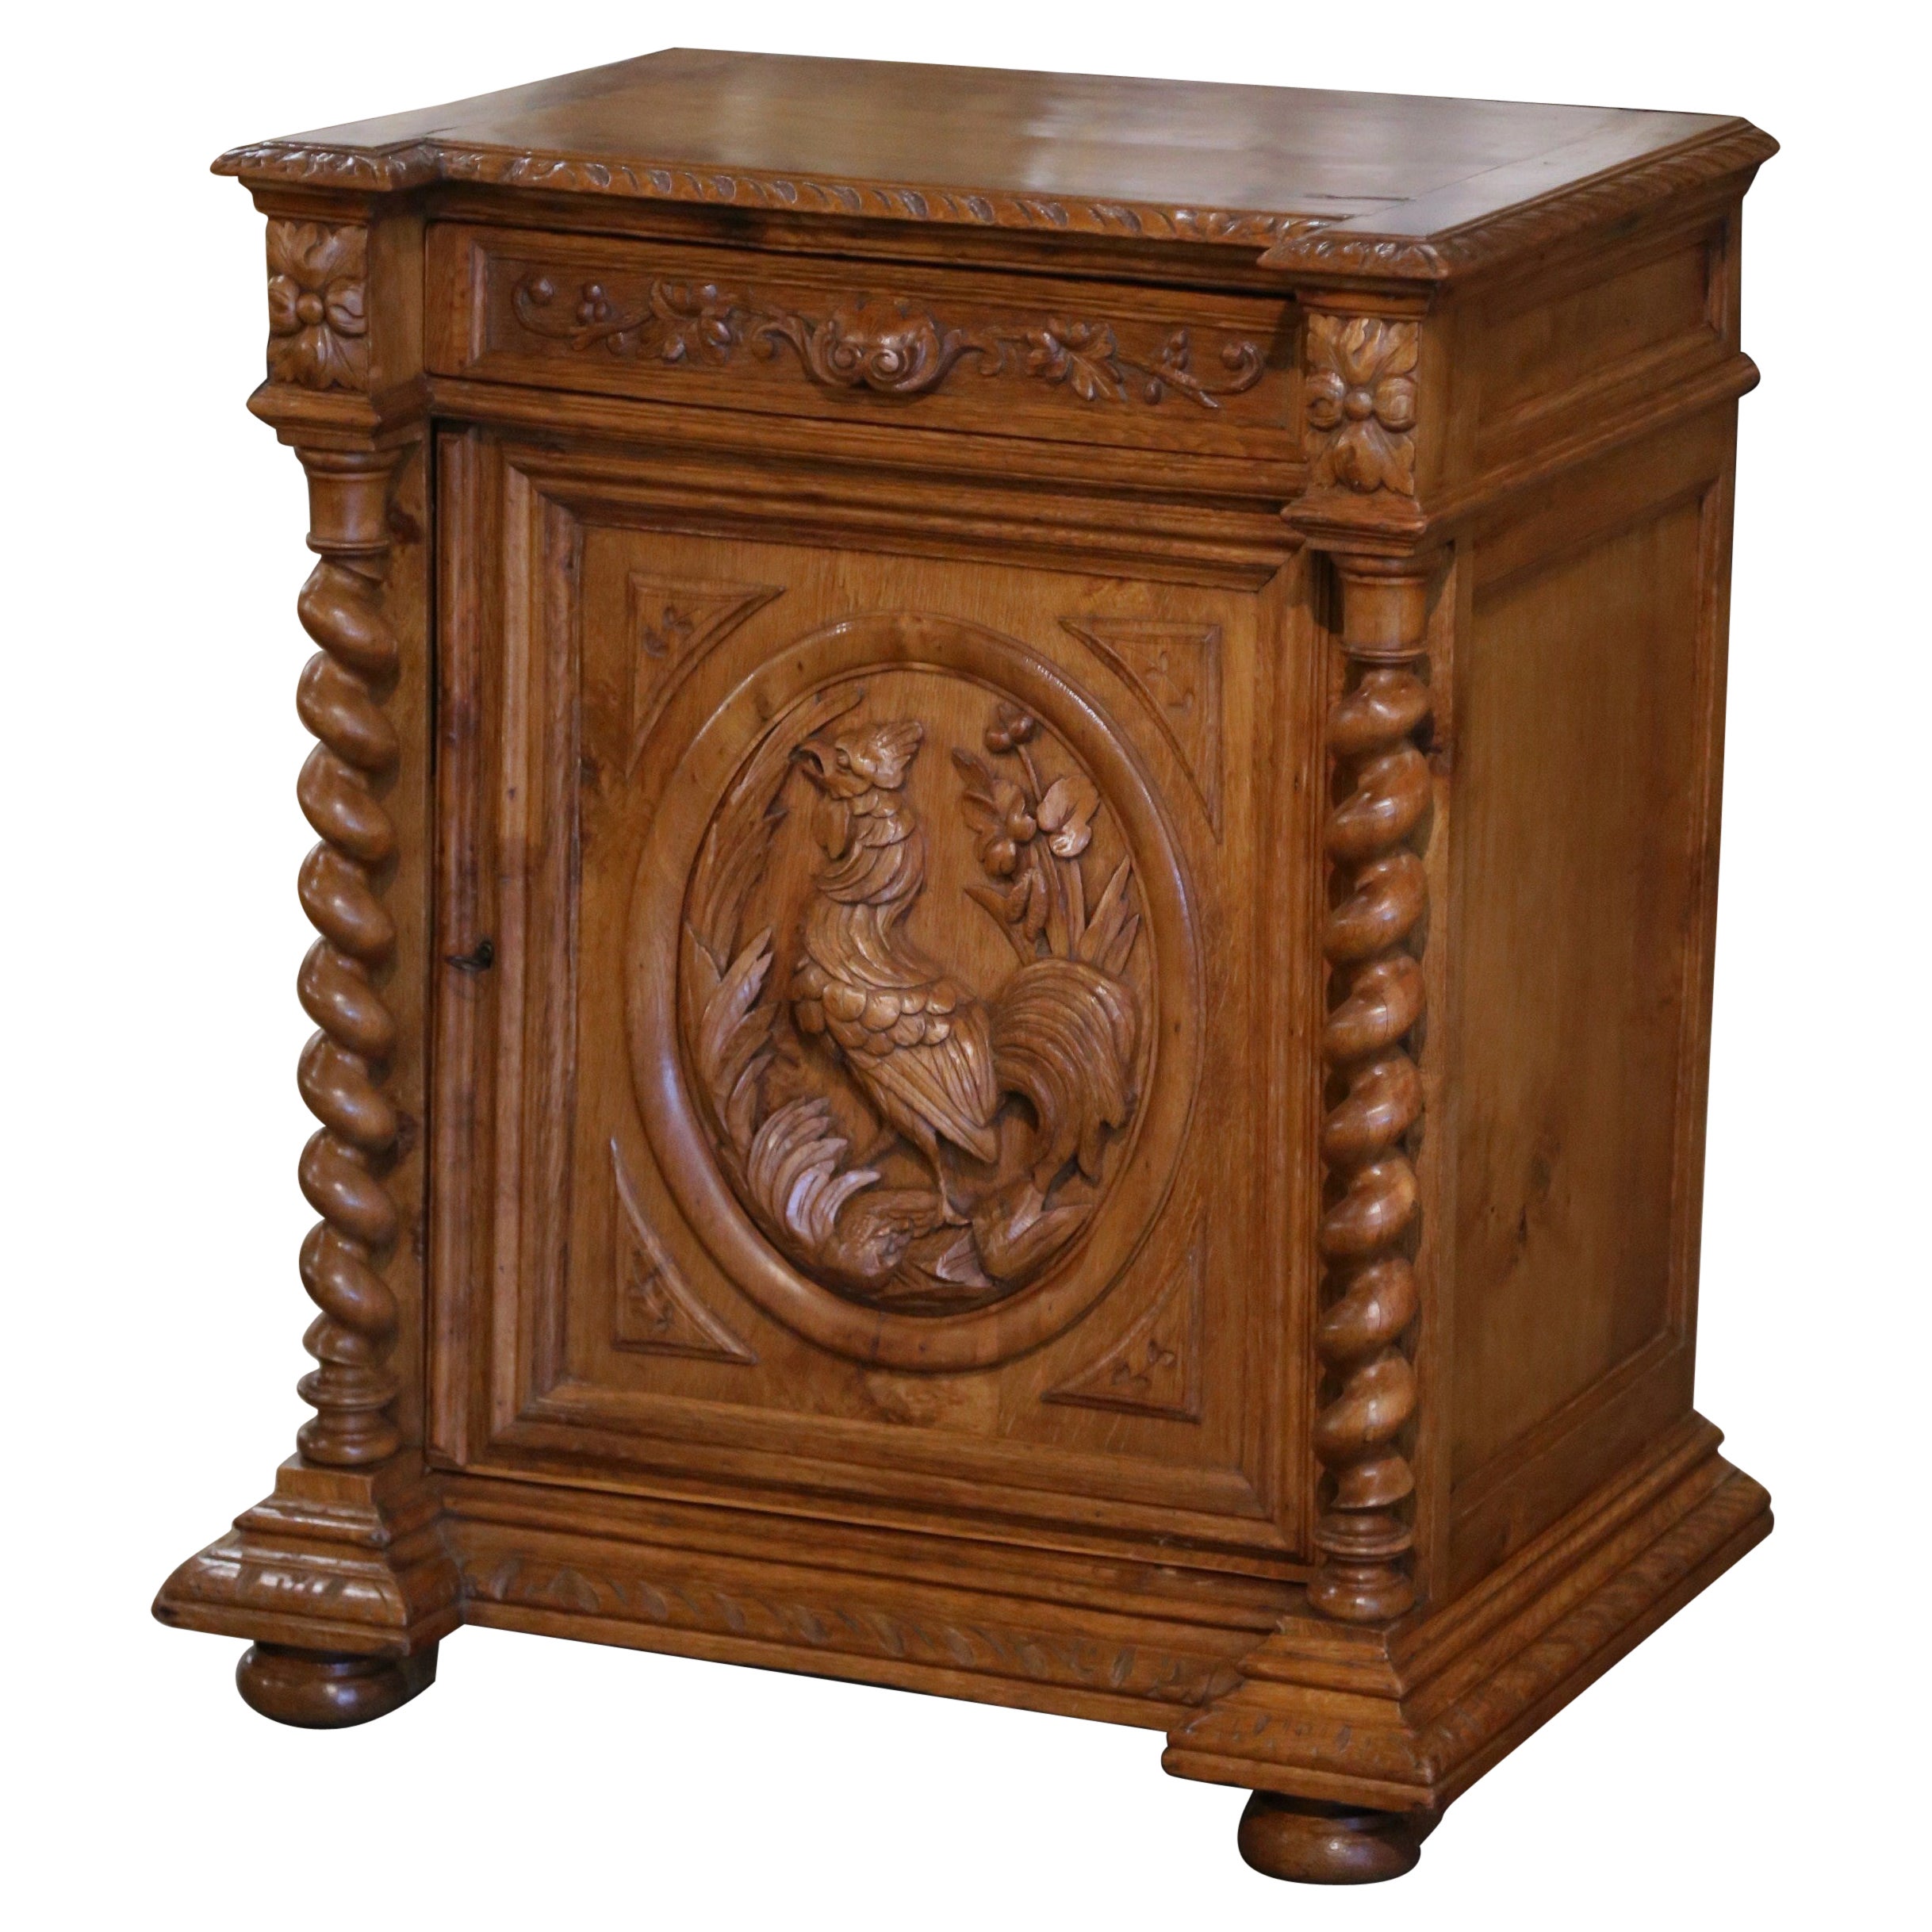 19th Century French Louis XIII Oak Barley Twist Jelly Cabinet with Rooster Motif For Sale